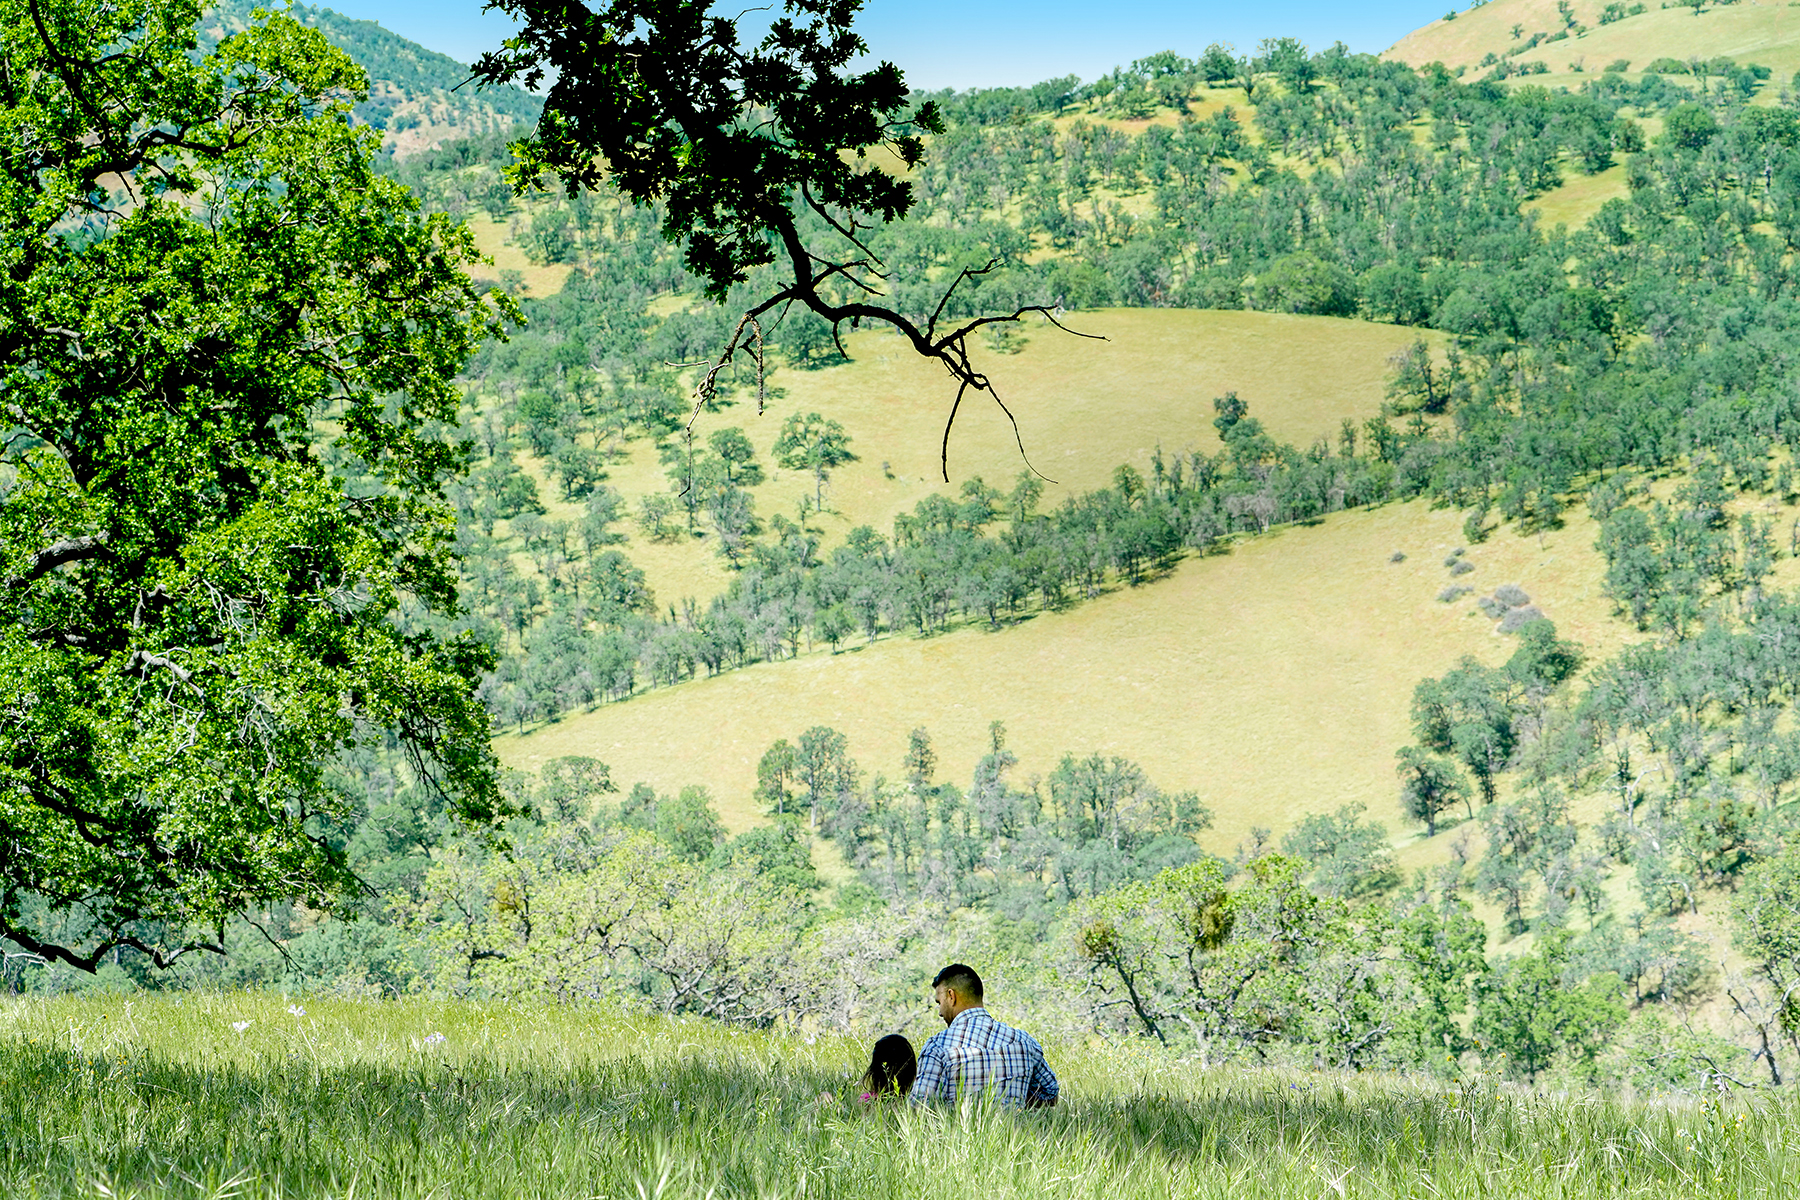 A couple taking a moment to relax in a grassy meadow